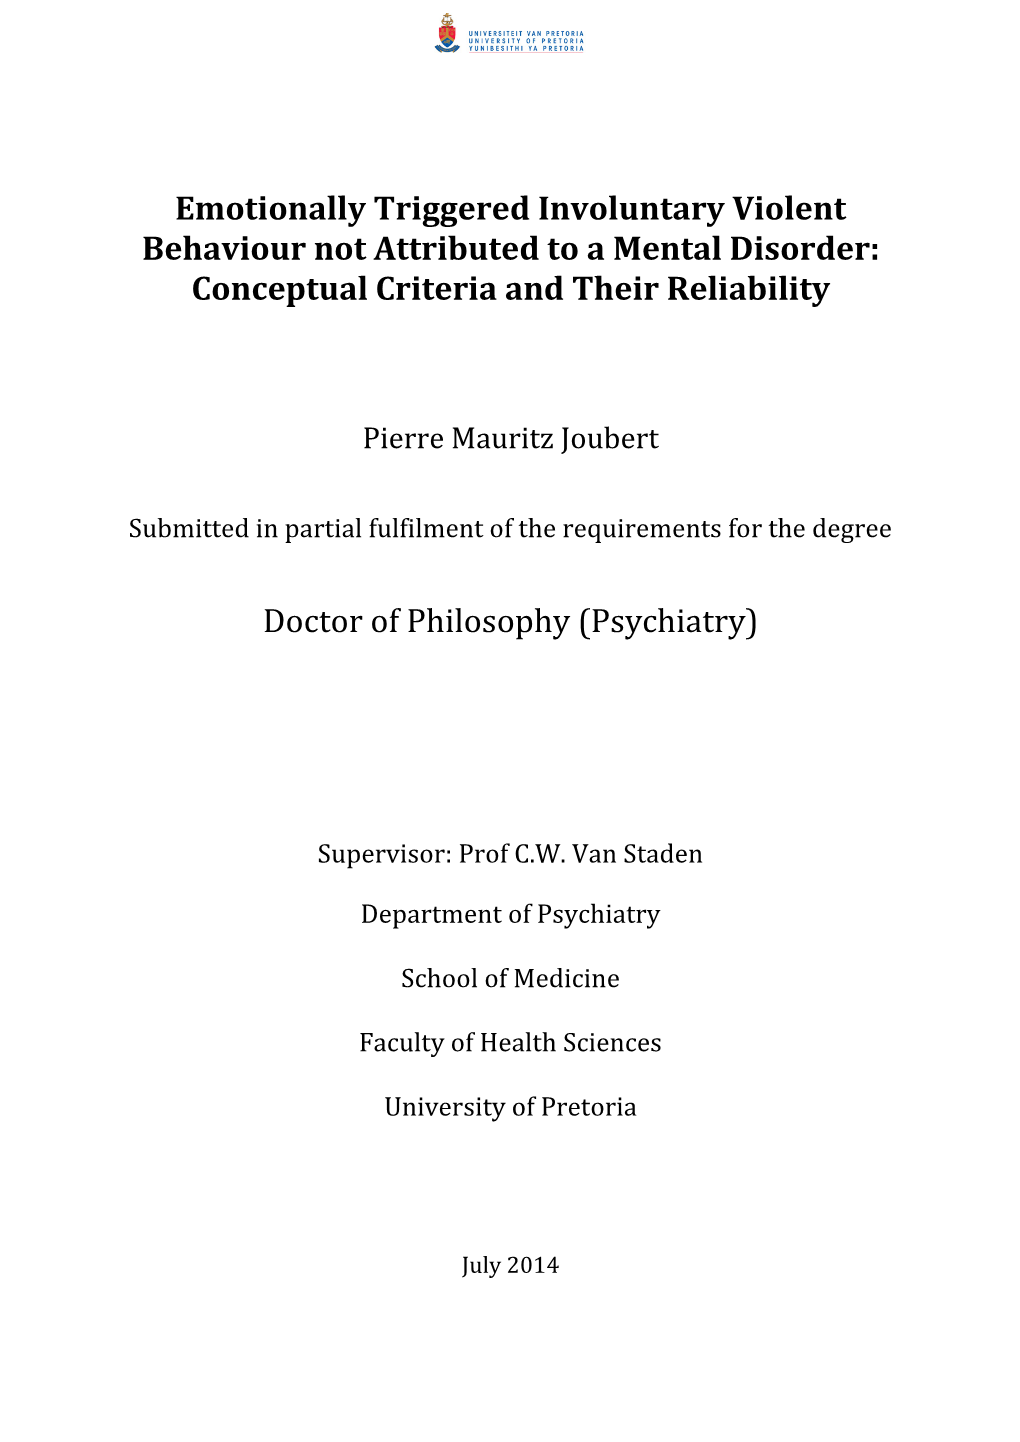 Emotionally Triggered Involuntary Violent Behaviour Not Attributed to a Mental Disorder: Conceptual Criteria and Their Reliability